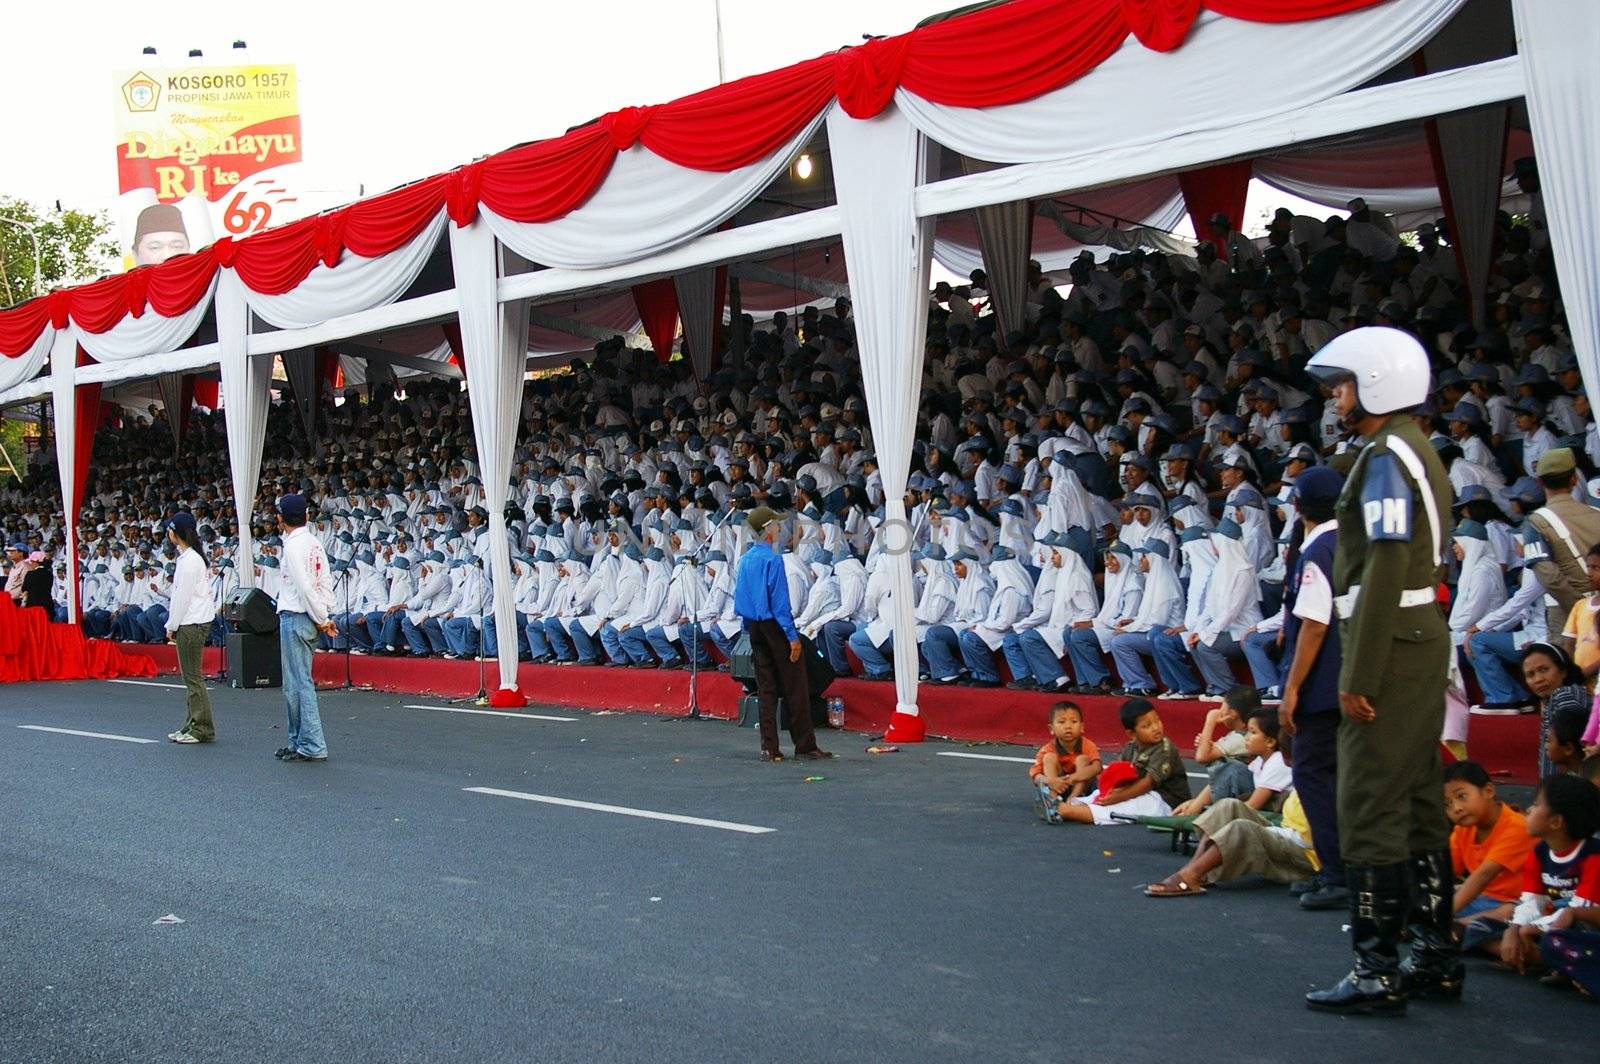 Independence day events, Indonesia by Komar